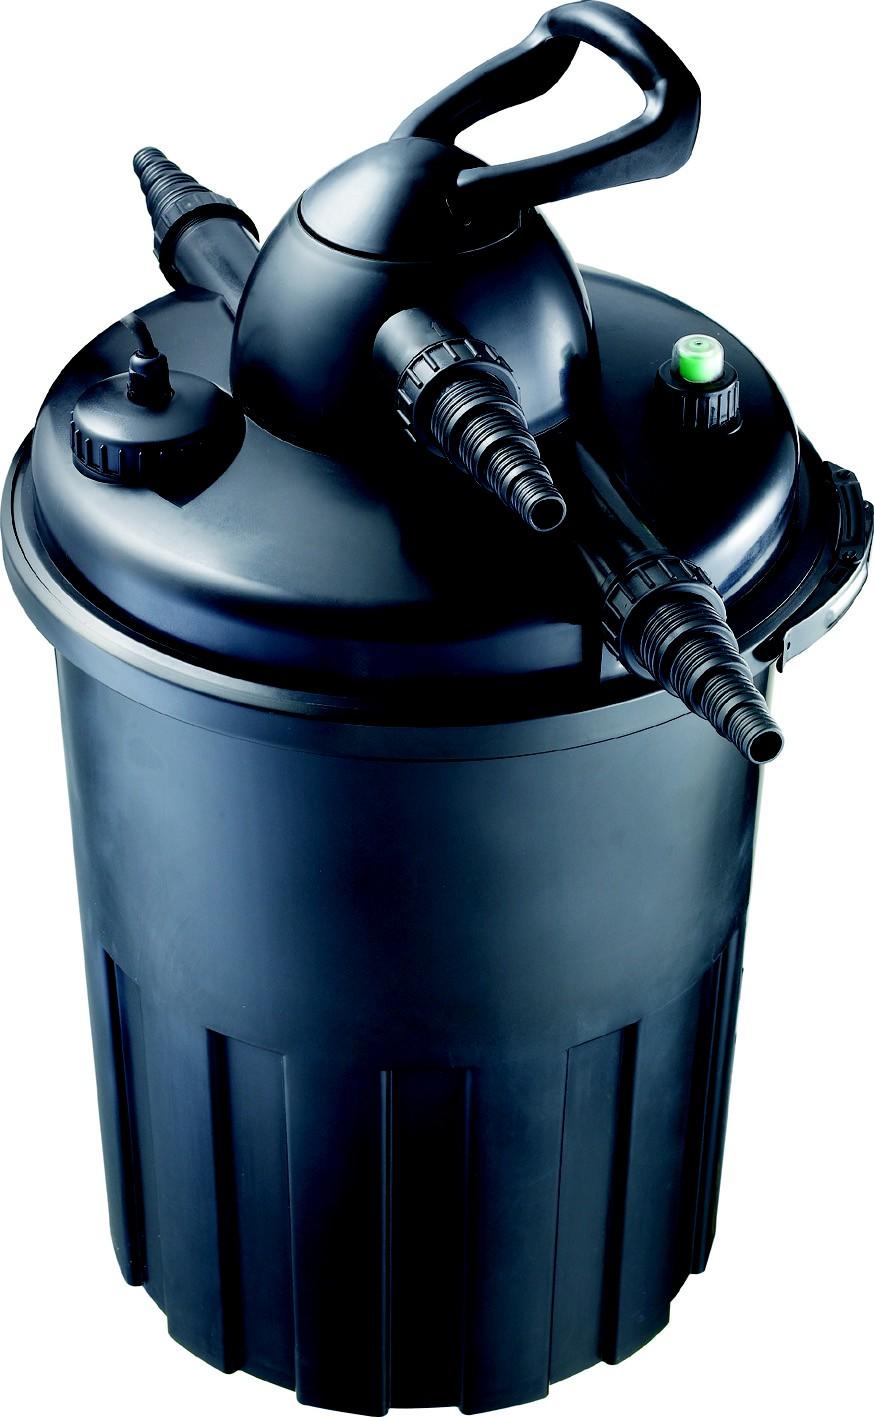 Your filter is pump fed so must be connected to a suitable pond pump in order to work correctly. Ideally a solids-handling pump will be used as this will push dirty waste and debris into the filter.